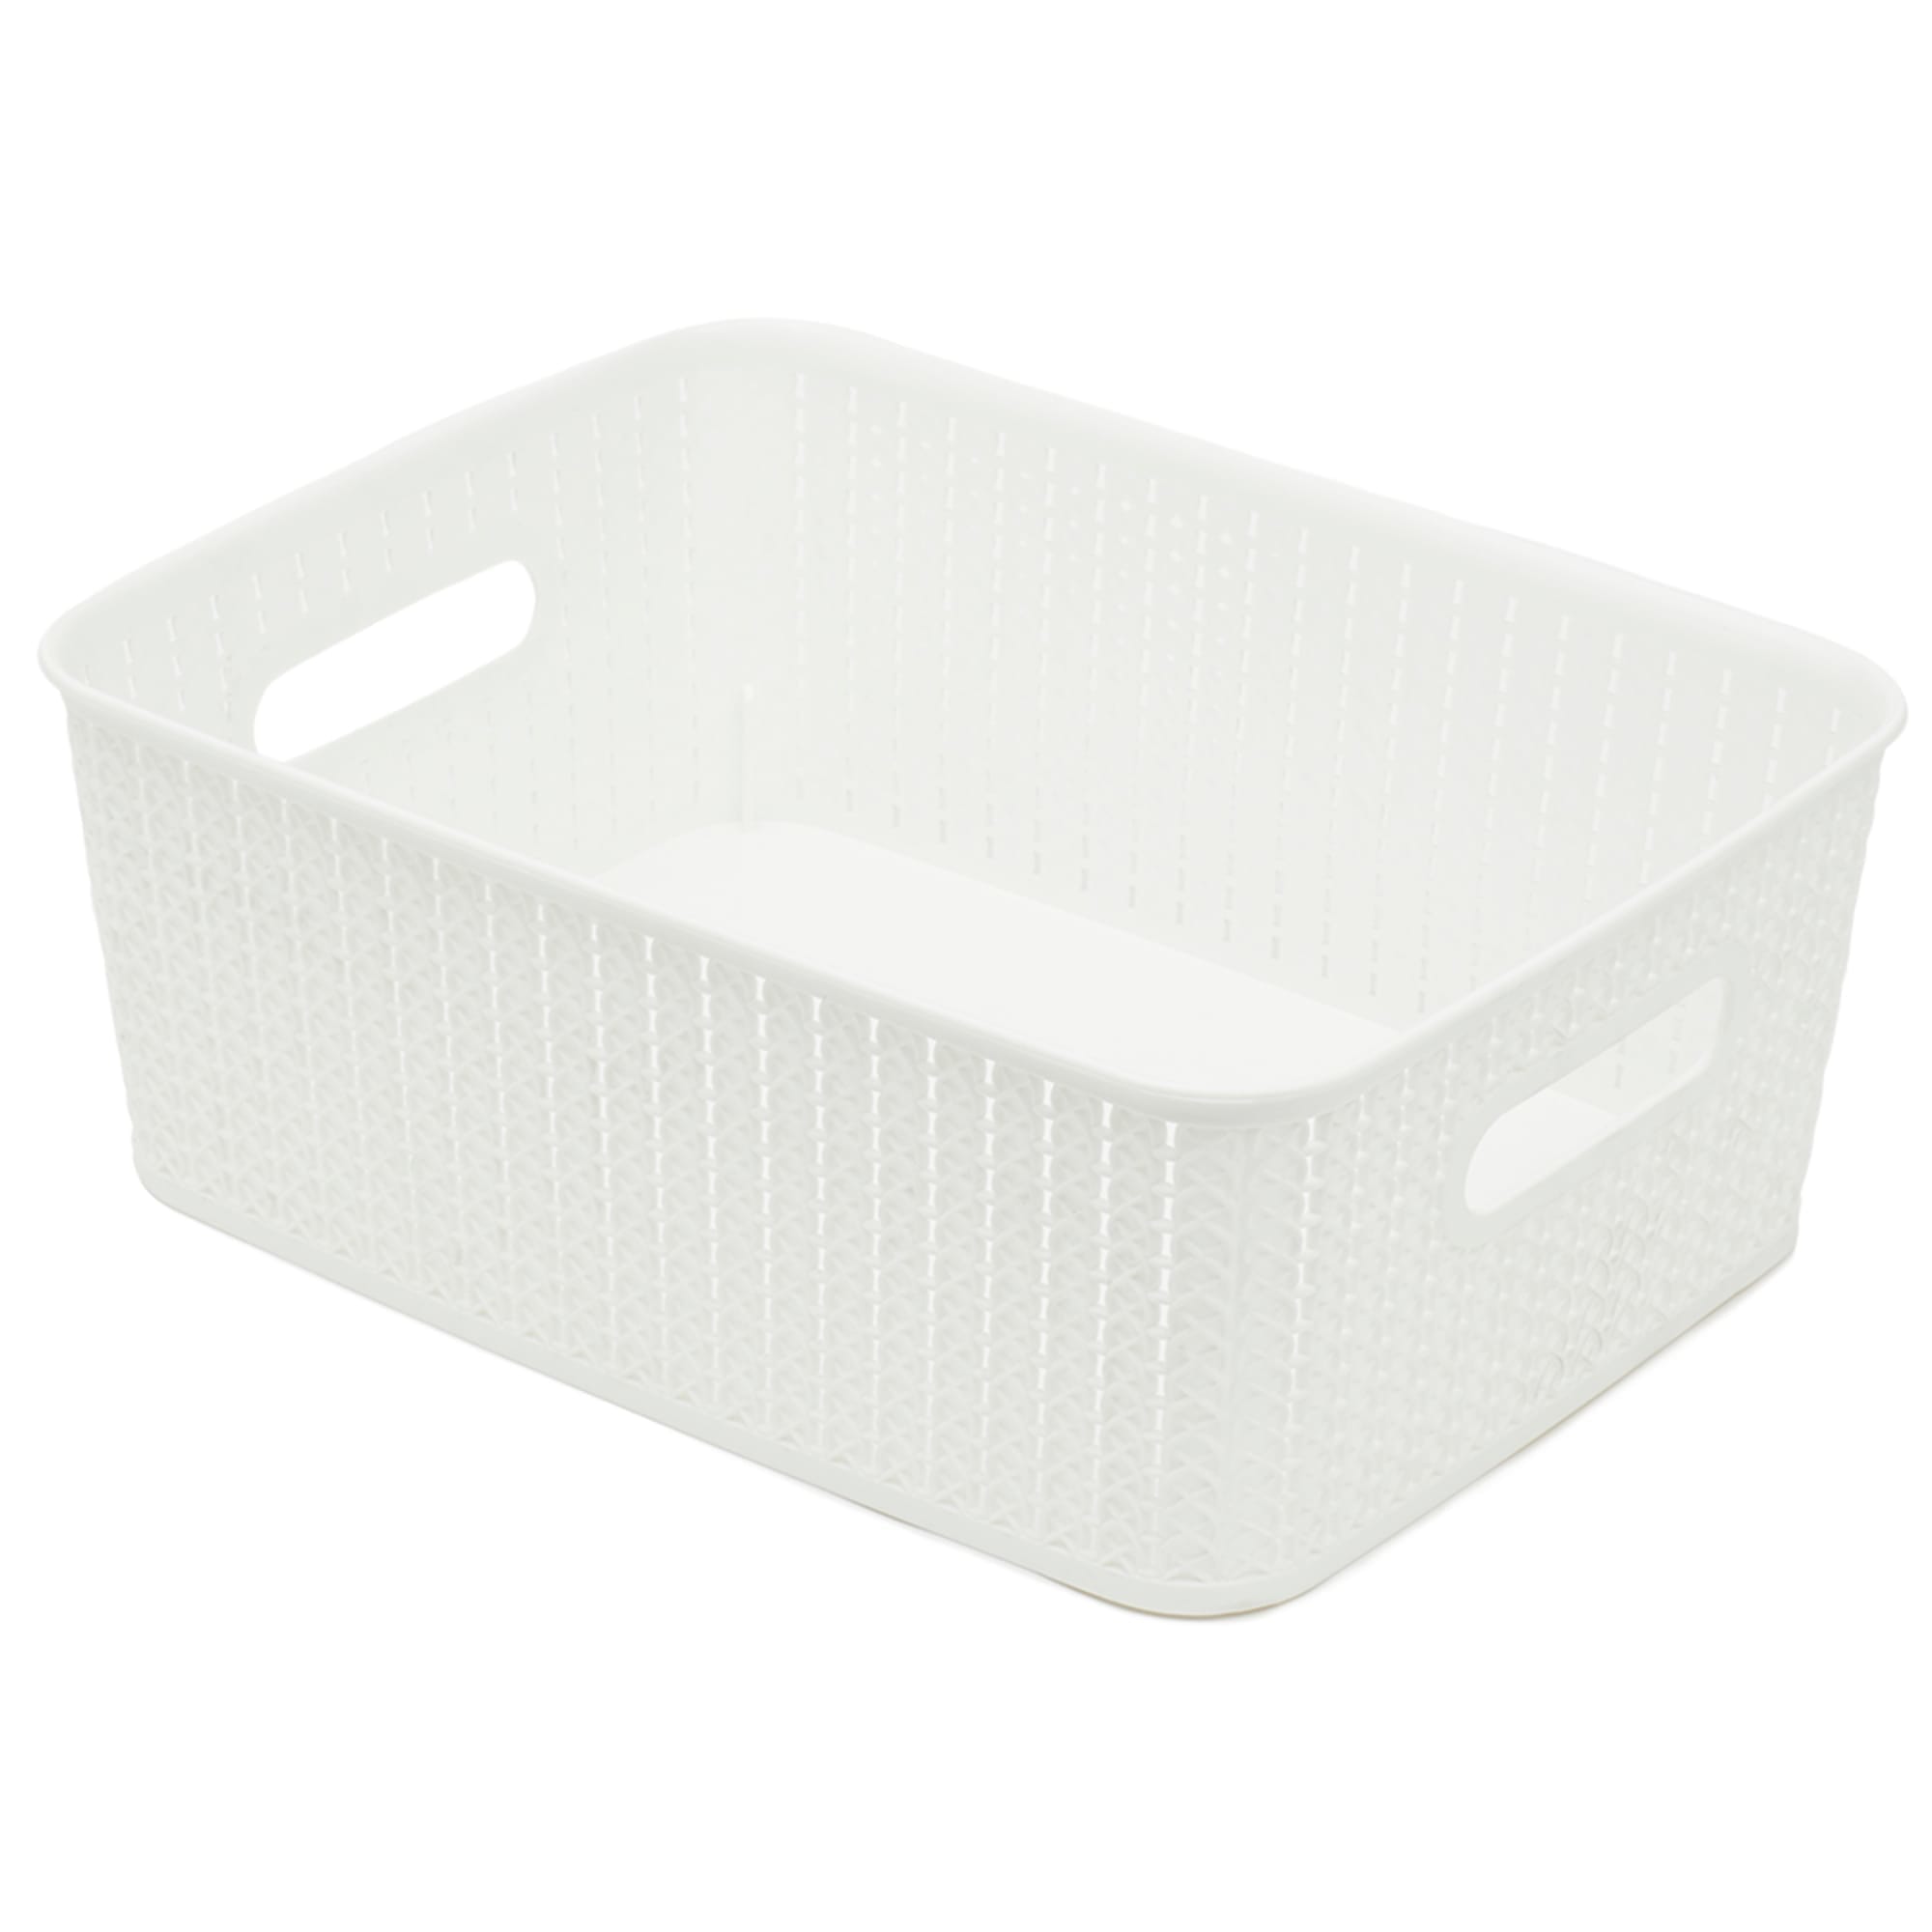 Home Basics 12.5 Liter Plastic Basket With Handles, White $5 EACH, CASE PACK OF 6